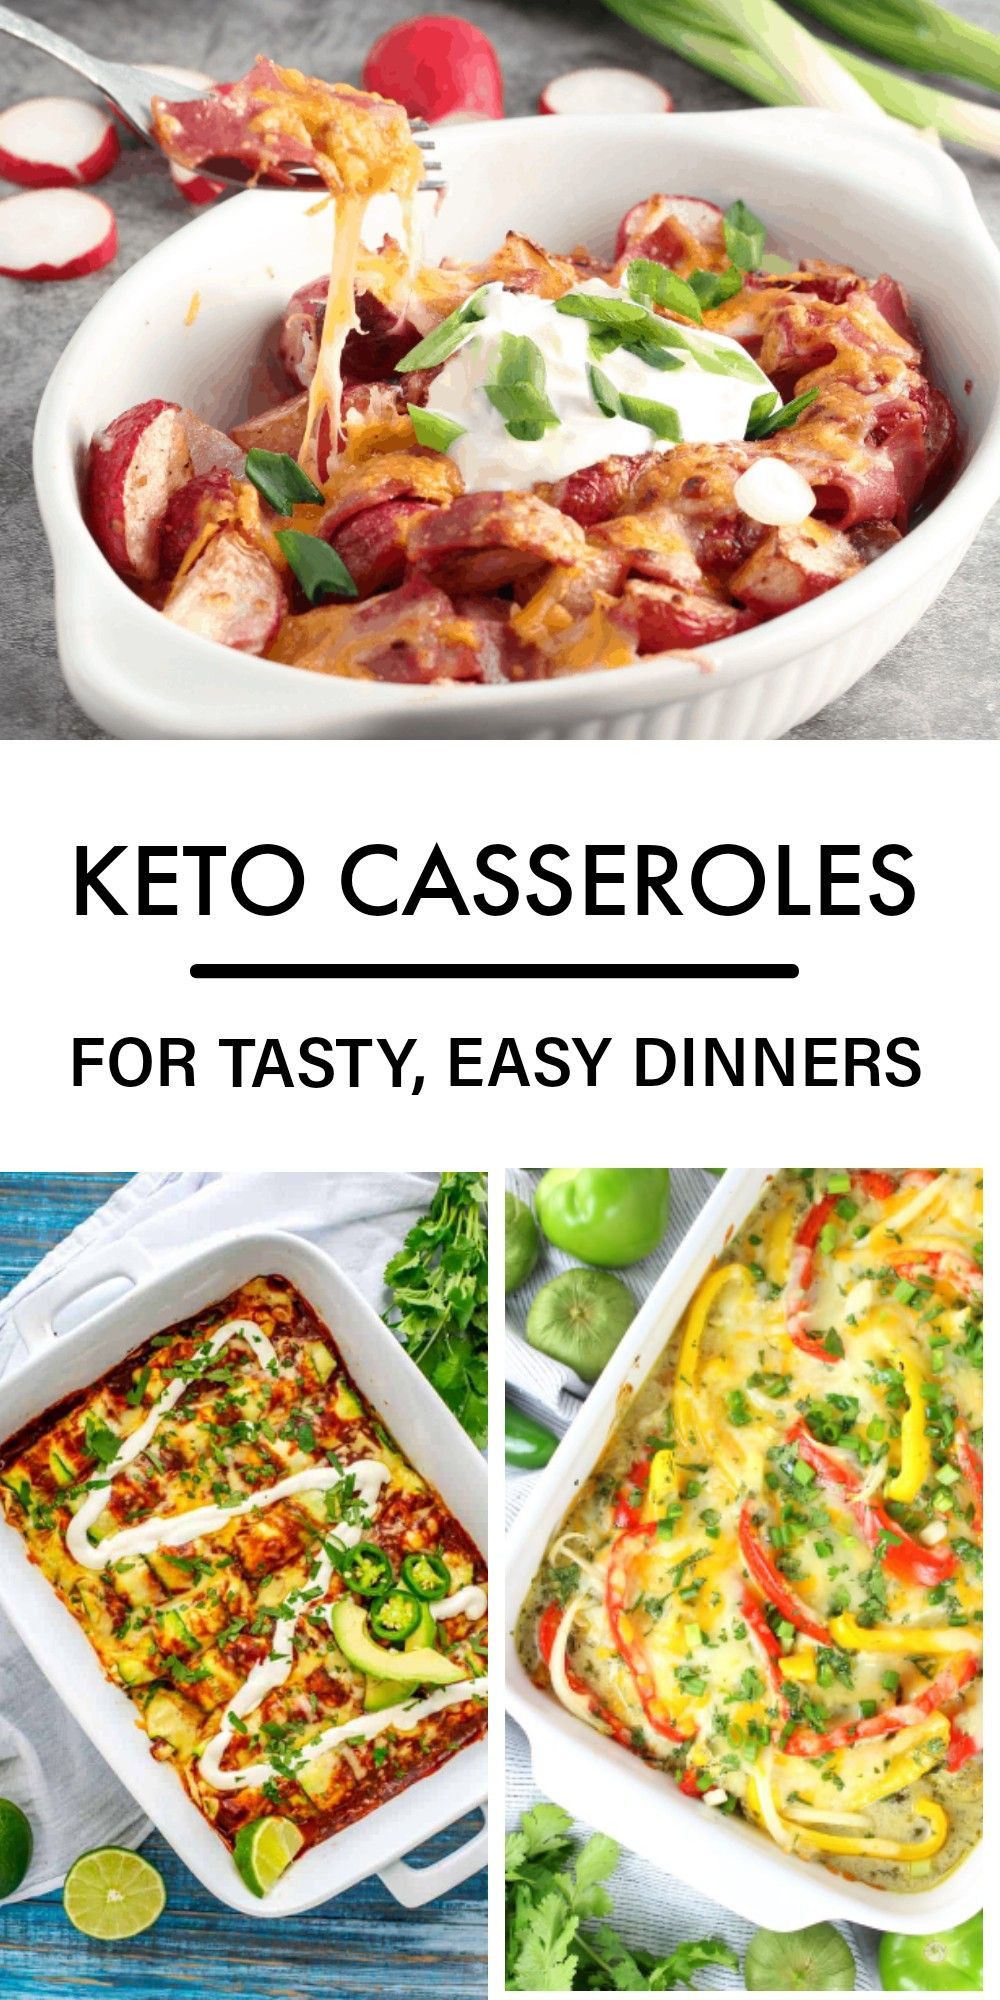 Keto Casserole Recipes Easy Dinners
 21 Easy And Delicious Keto Casseroles in 2020 With images